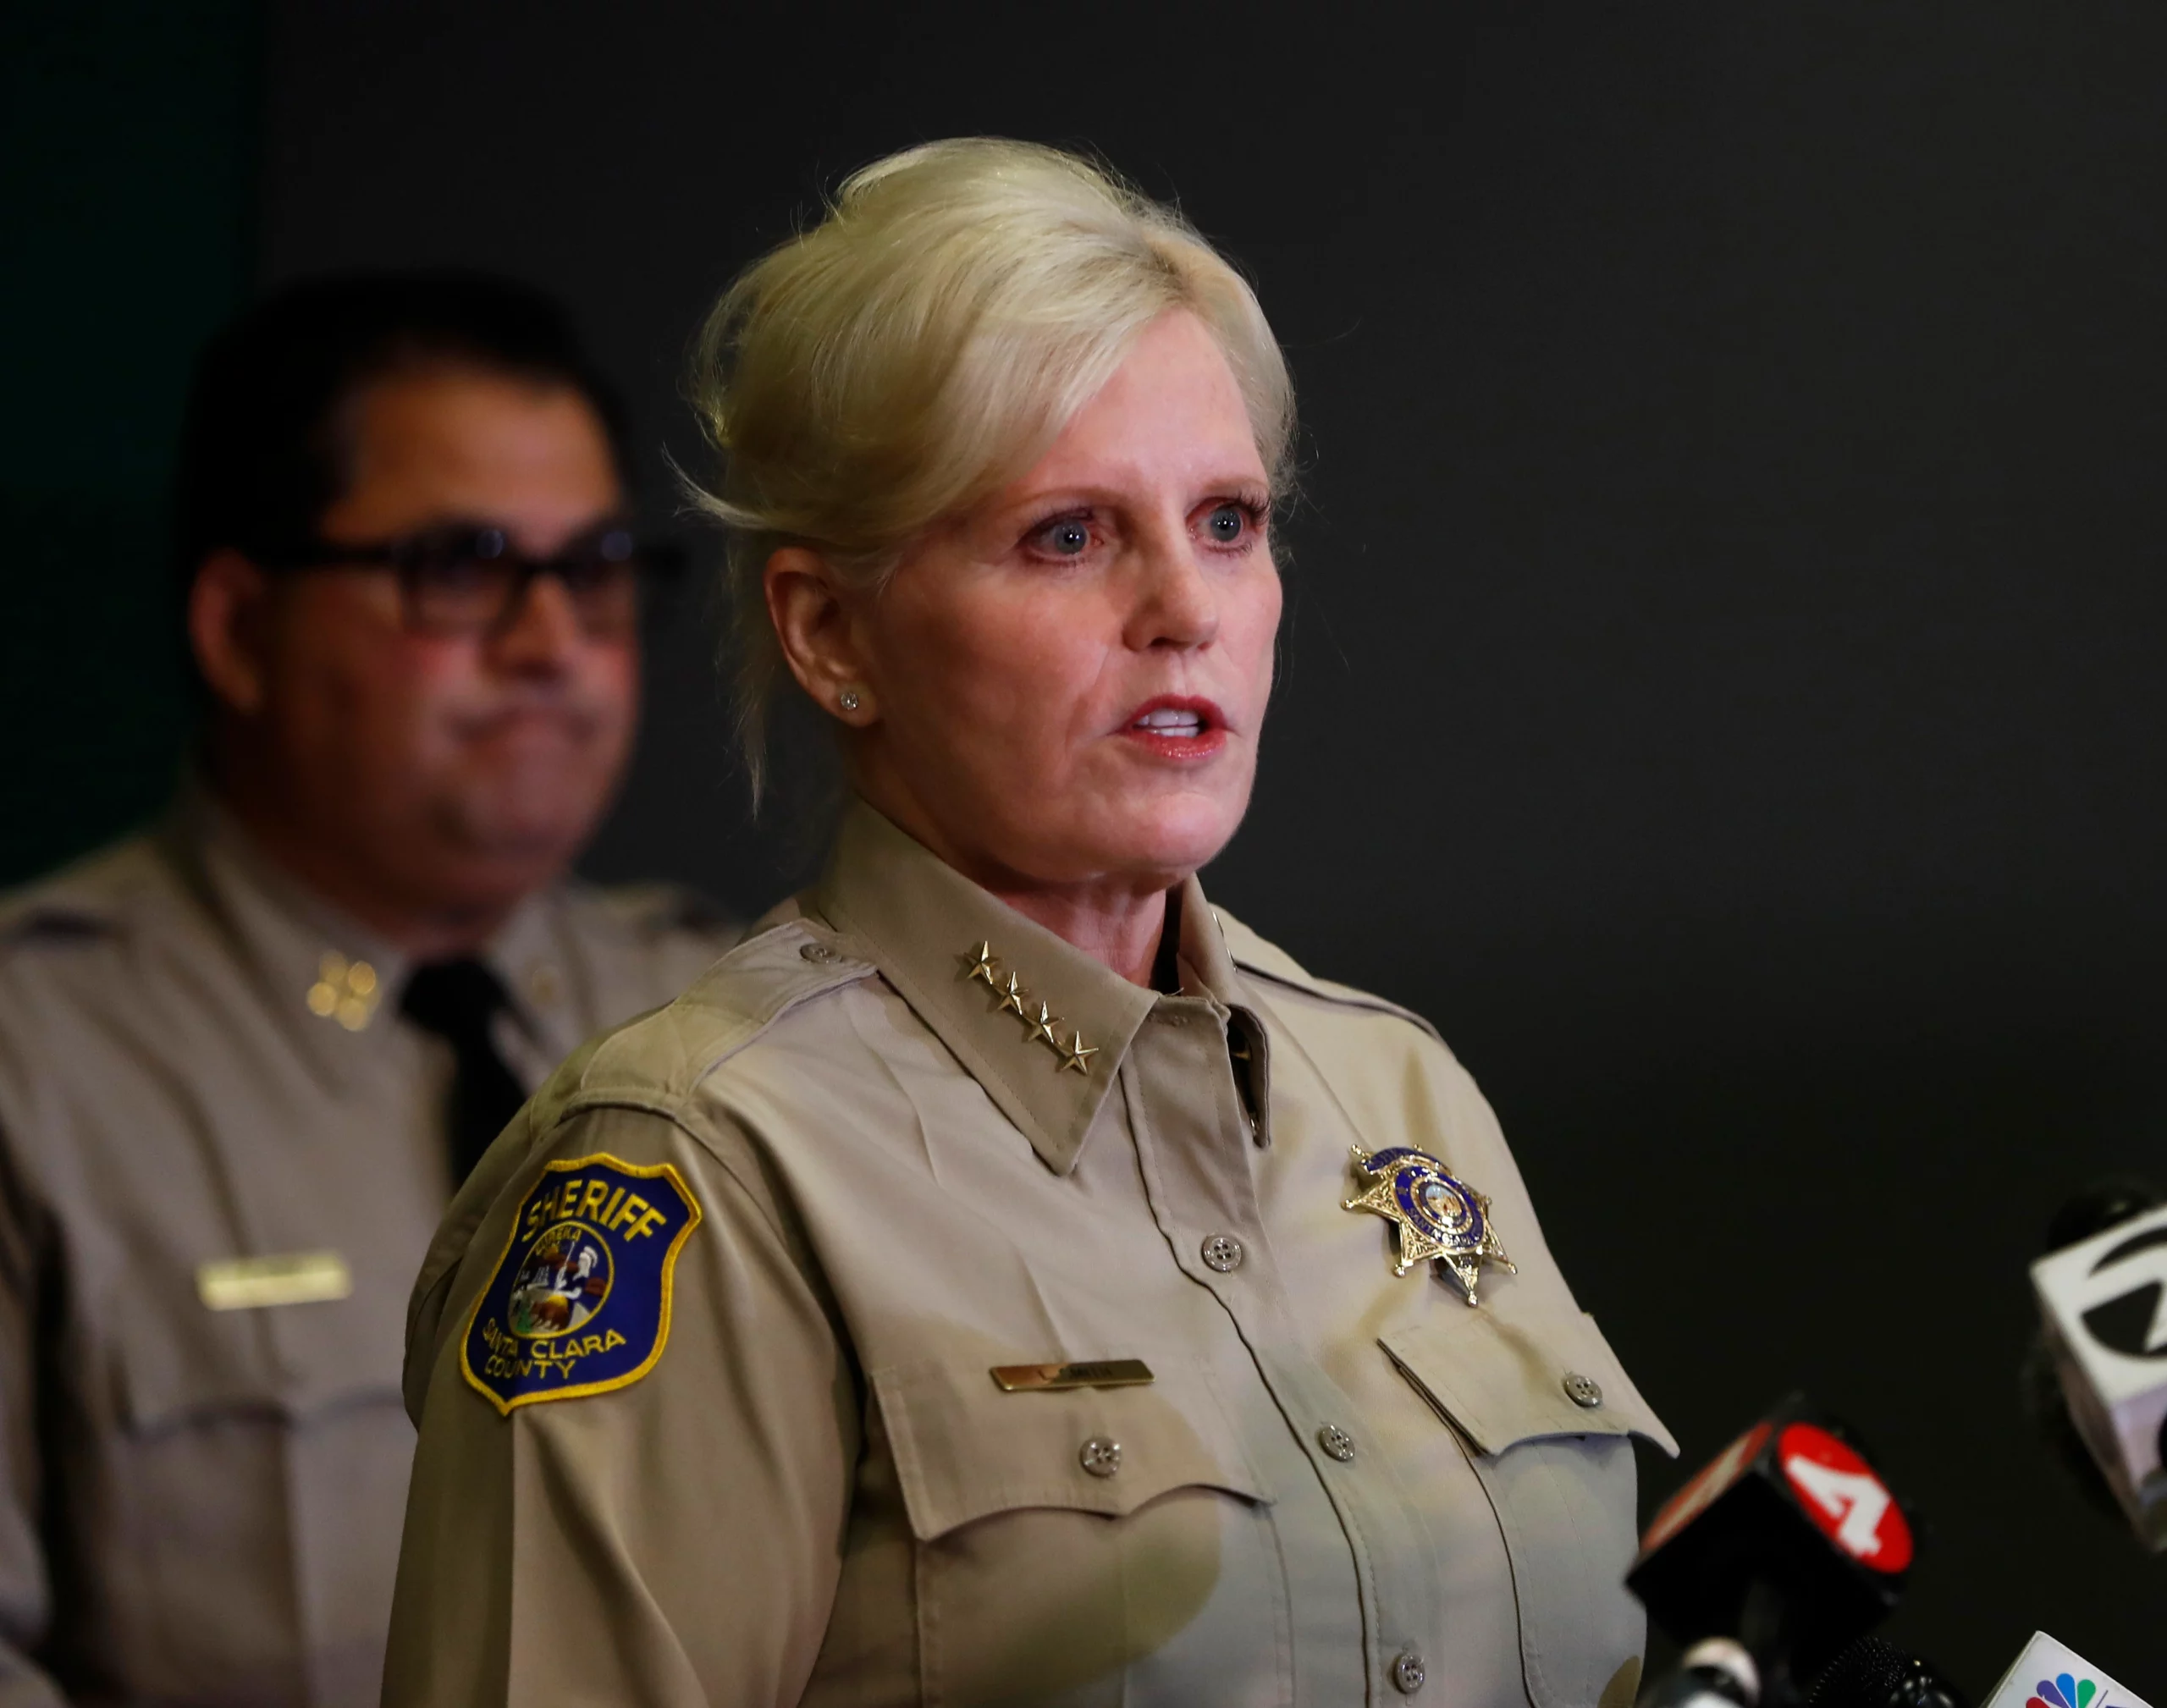 Corruption Trial Against Embattled Santa Clara County Sheriff to Begin With Jury Selection